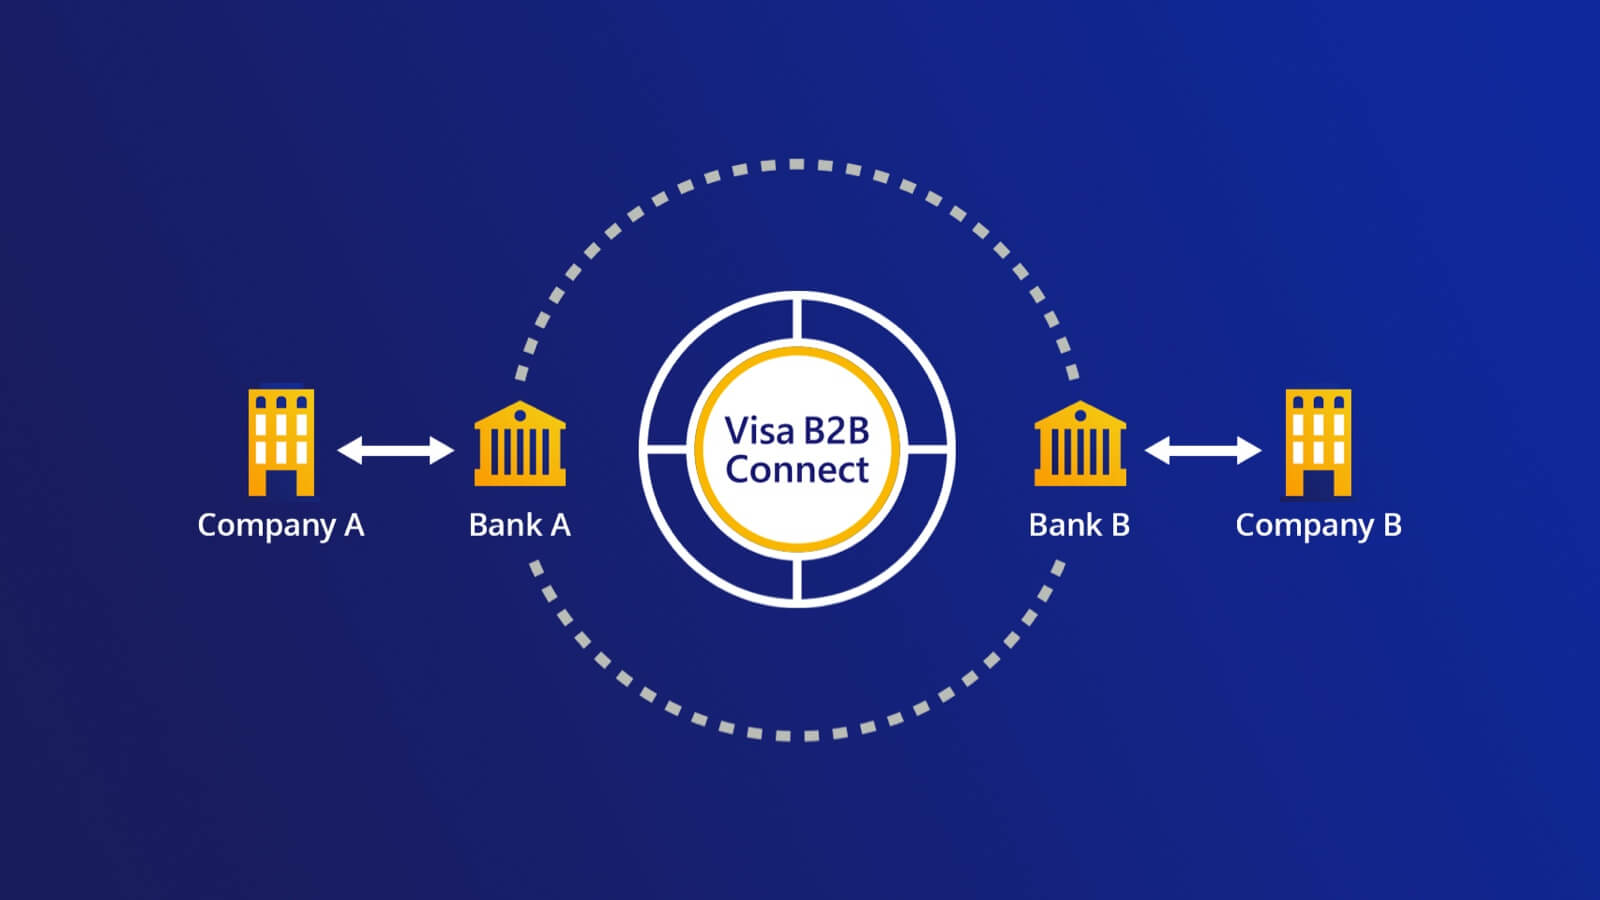 Illustration of Visa B2B Connect cross-border payment. See the Image Description link following the image for more details.